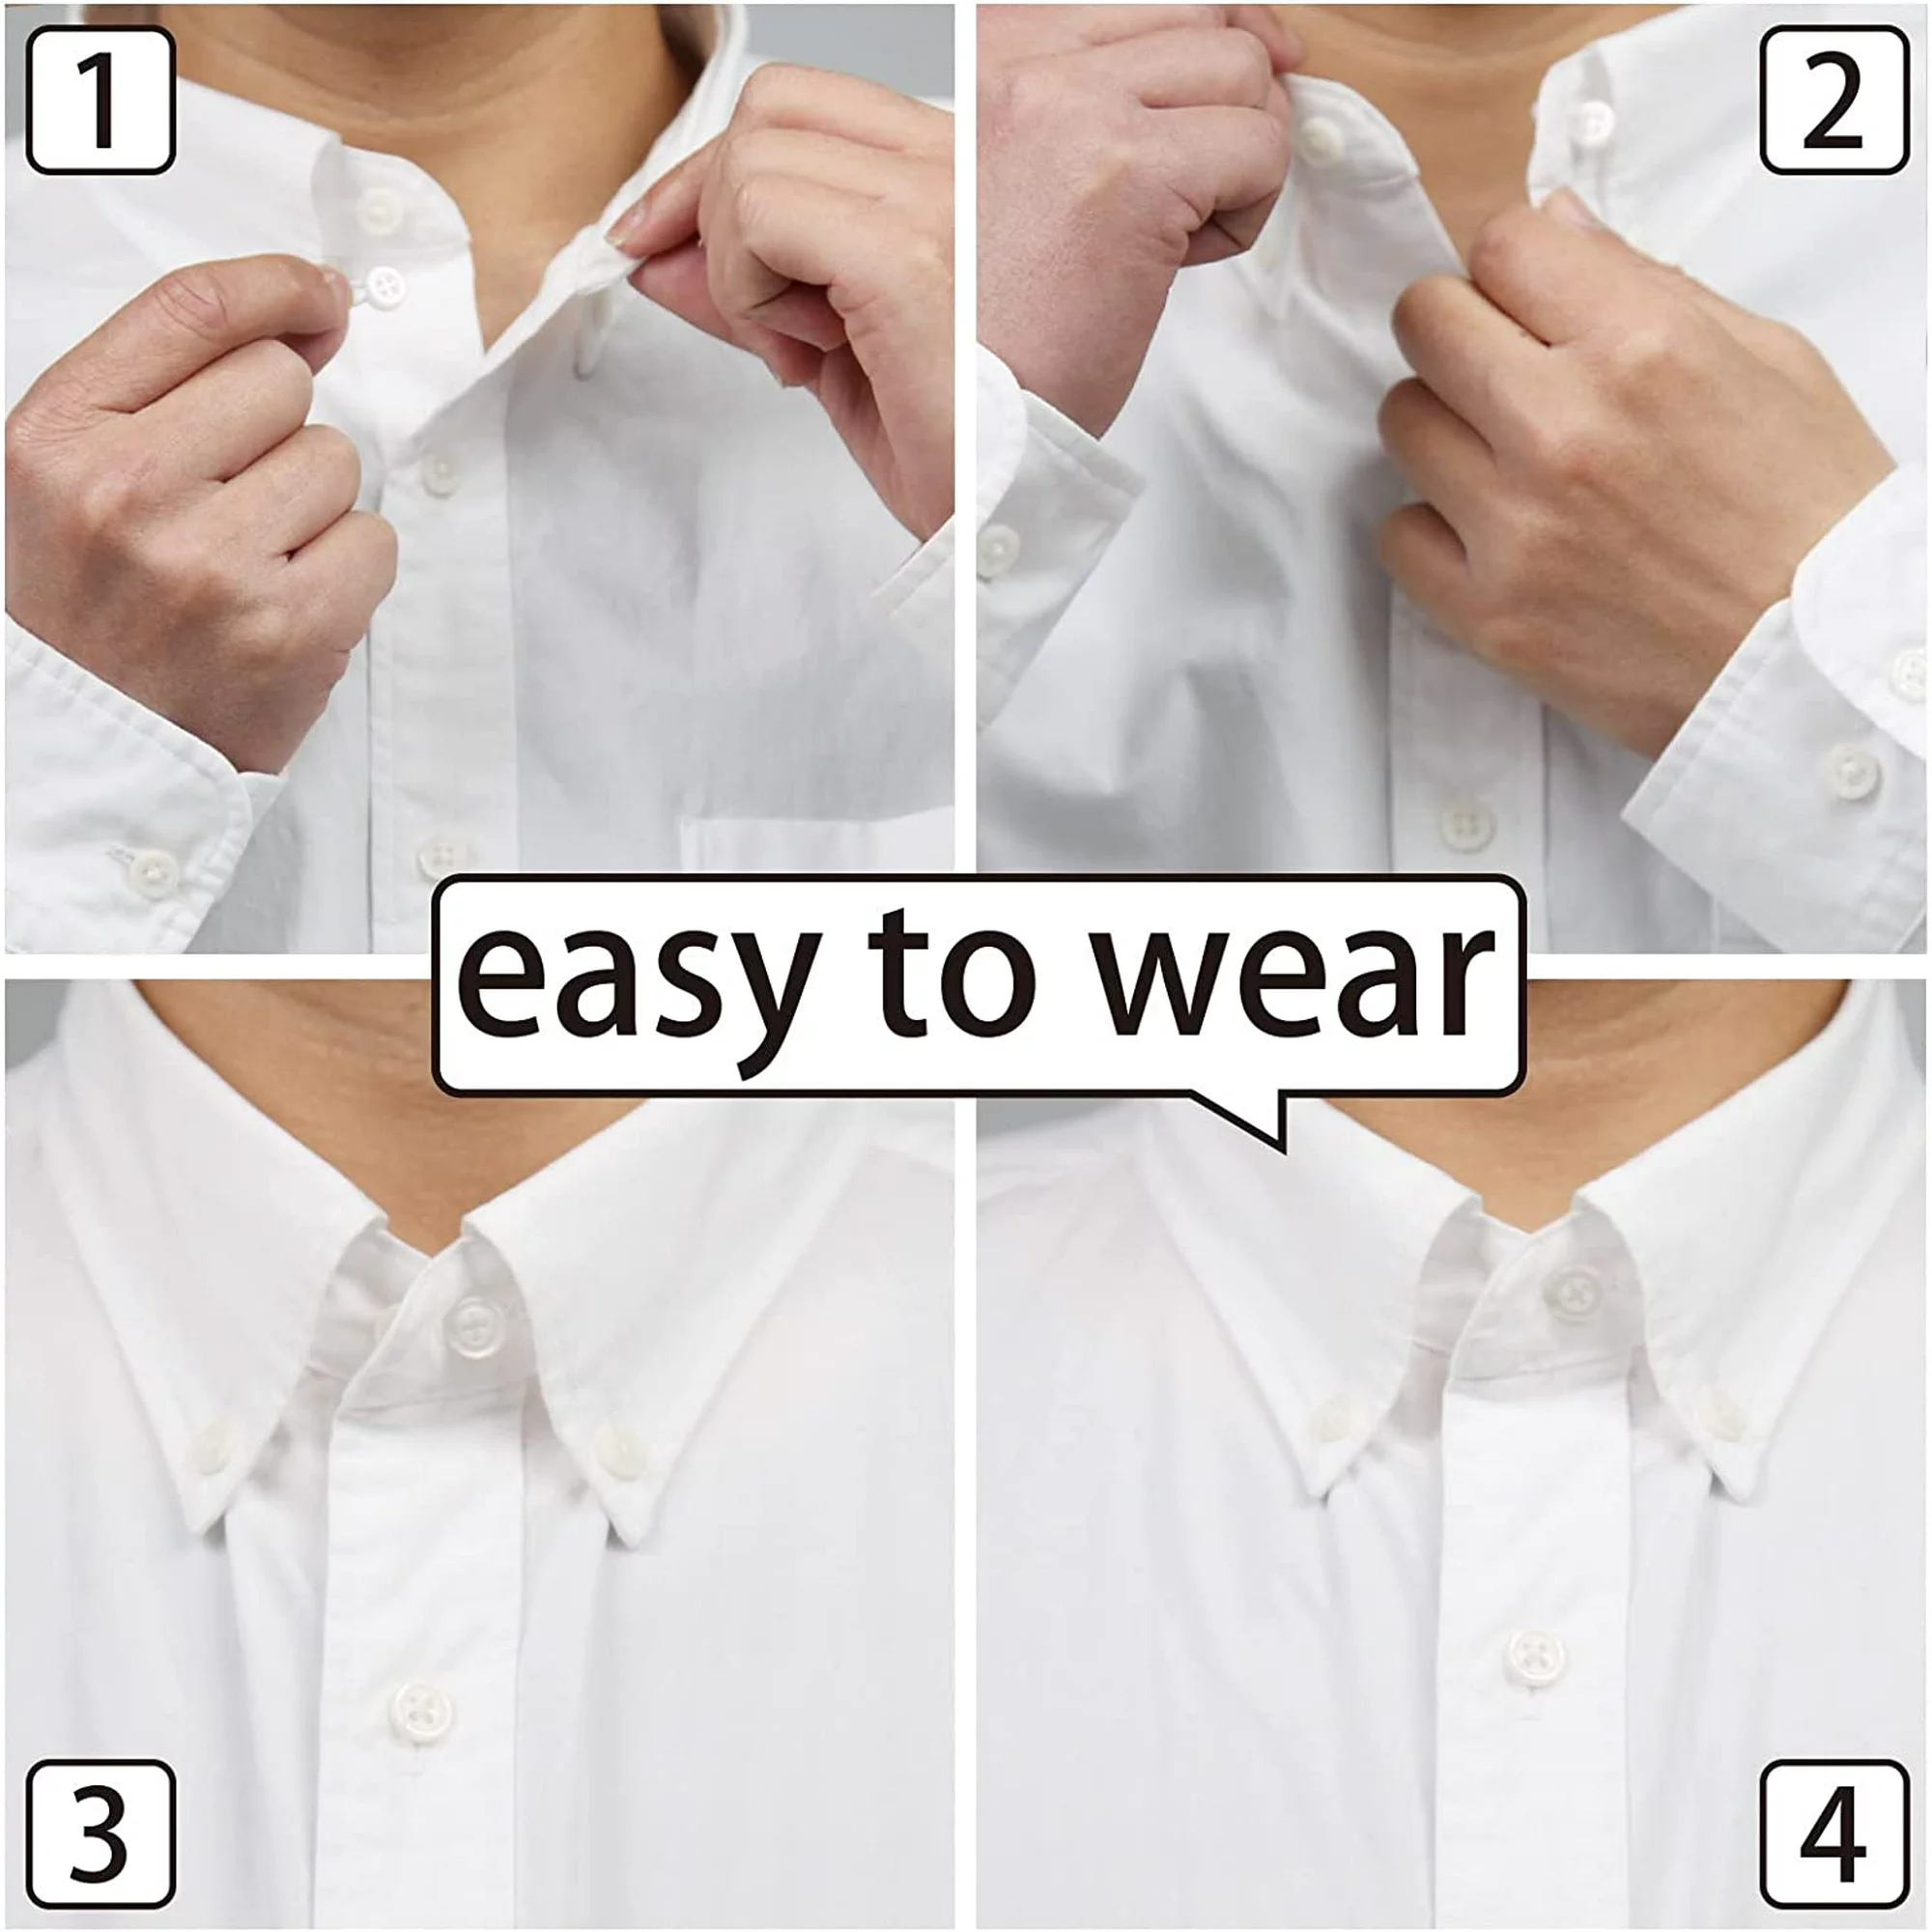 Trianu Clear Plastic Collar Extenders Stretch Neck Extender for 1/2 Size Expansion of Men Dress Shirts, 6 Pack, 3/8 inch, Adult Unisex, Size: 0.39 x